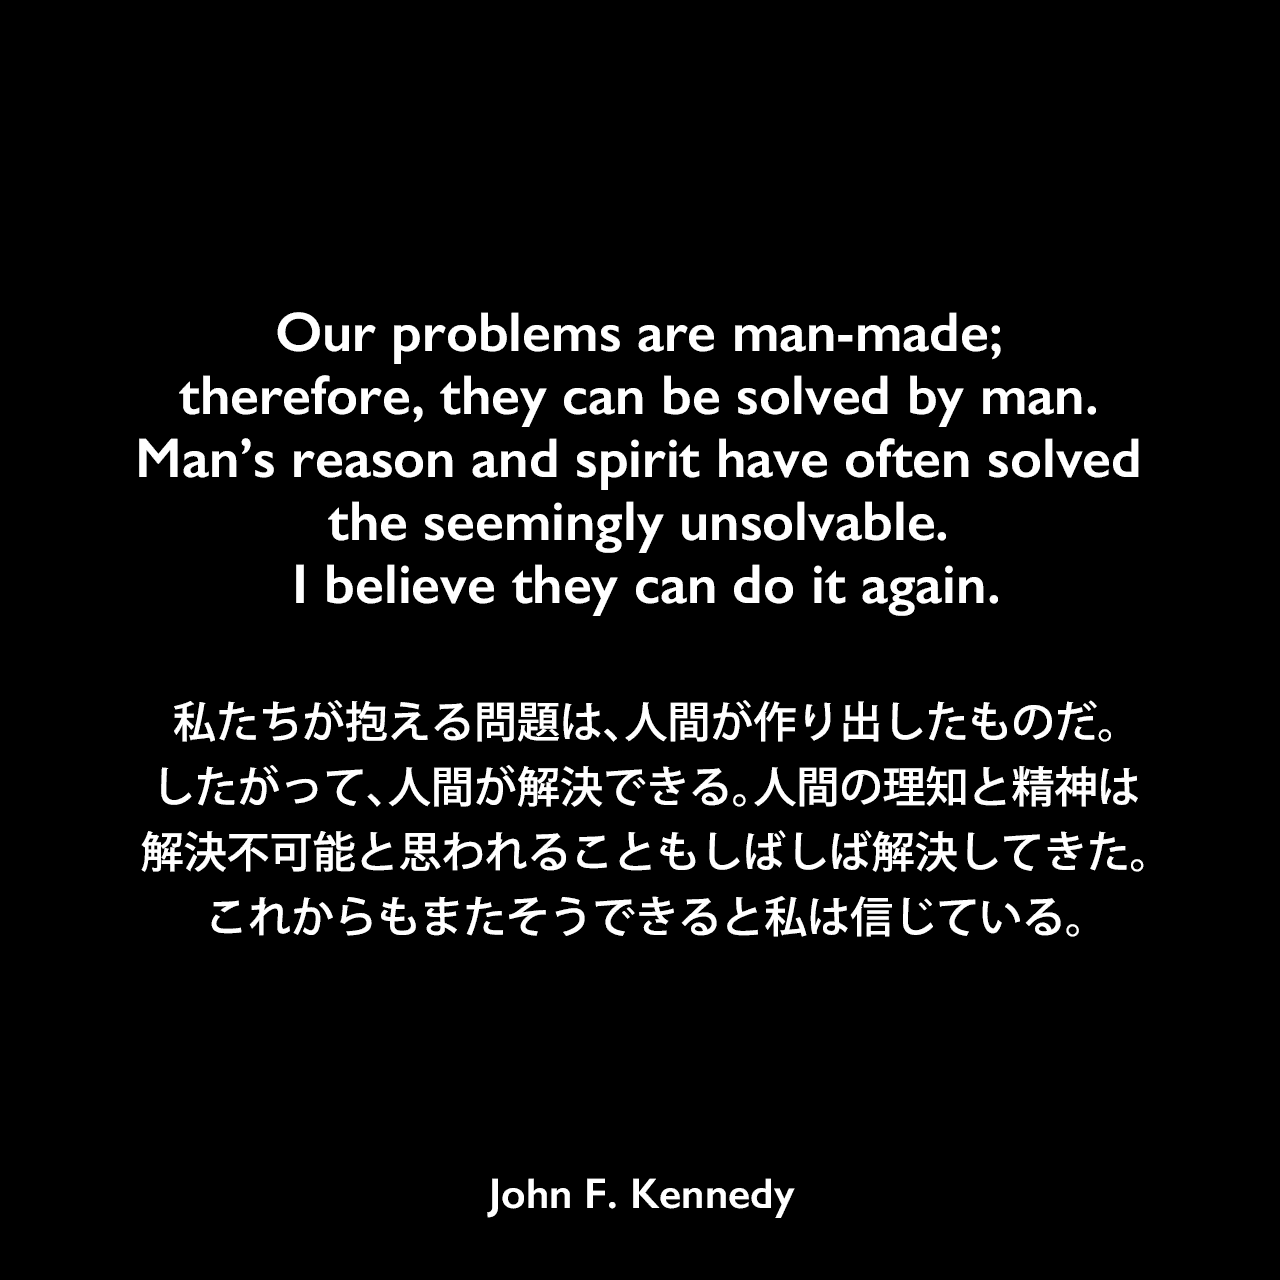 Our problems are man-made; therefore, they can be solved by man. Man’s reason and spirit have often solved the seemingly unsolvable. I believe they can do it again.私たちが抱える問題は、人間が作り出したものだ。したがって、人間が解決できる。人間の理知と精神は、解決不可能と思われることもしばしば解決してきた。これからもまたそうできると私は信じている。- アメリカン大学卒業式における演説「平和のための戦略 (THE STRATEGY OF PEACE) 」よりJohn F Kennedy